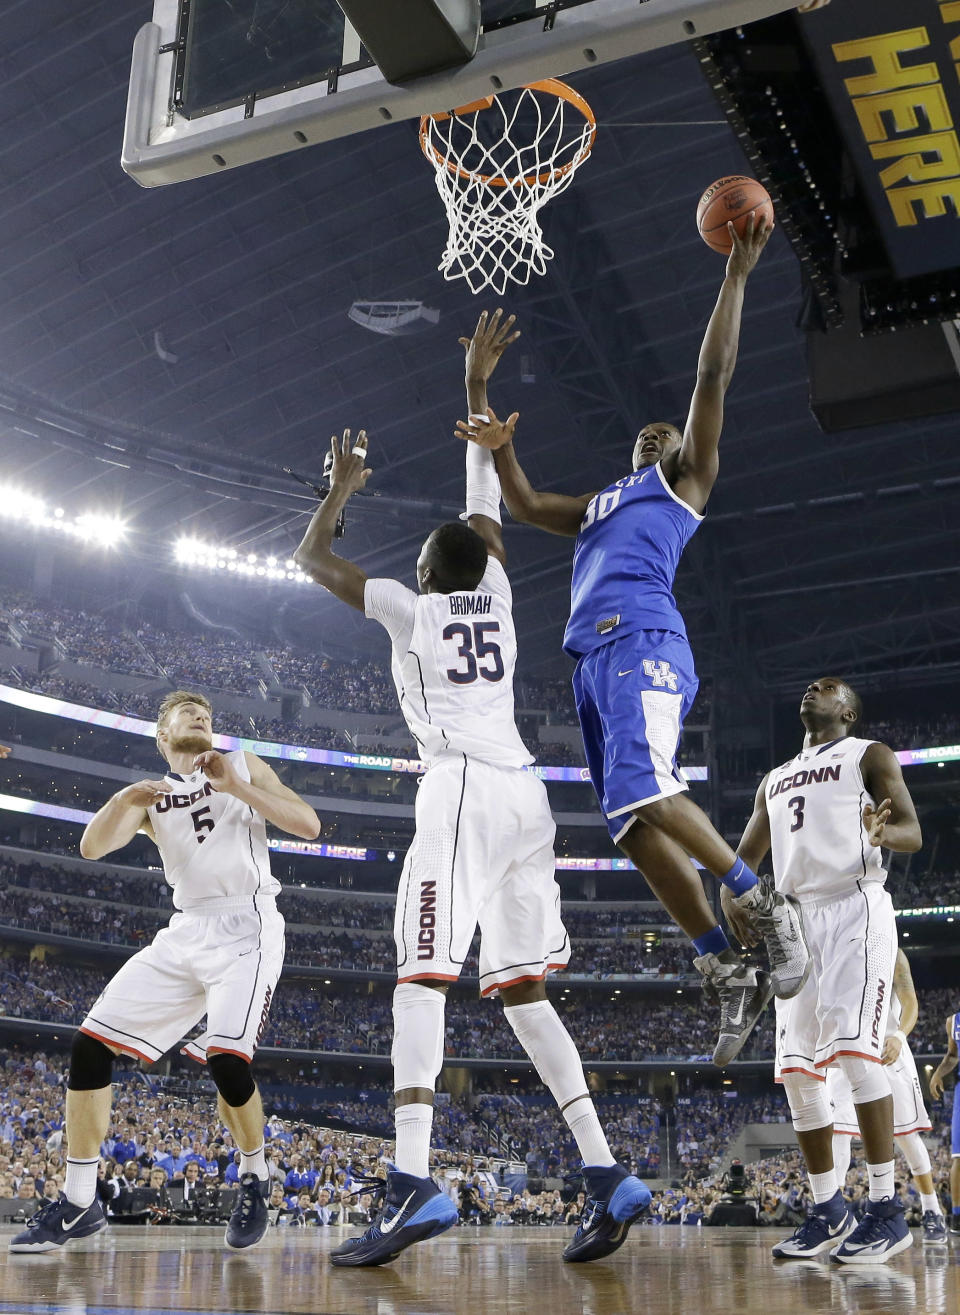 Kentucky forward Julius Randle (30) shoots over Connecticut center Amida Brimah (35) as Niels Giffey (5) and Terrence Samuel (3) look on during the first half of the NCAA Final Four tournament college basketball championship game Monday, April 7, 2014, in Arlington, Texas. (AP Photo/Eric Gay)